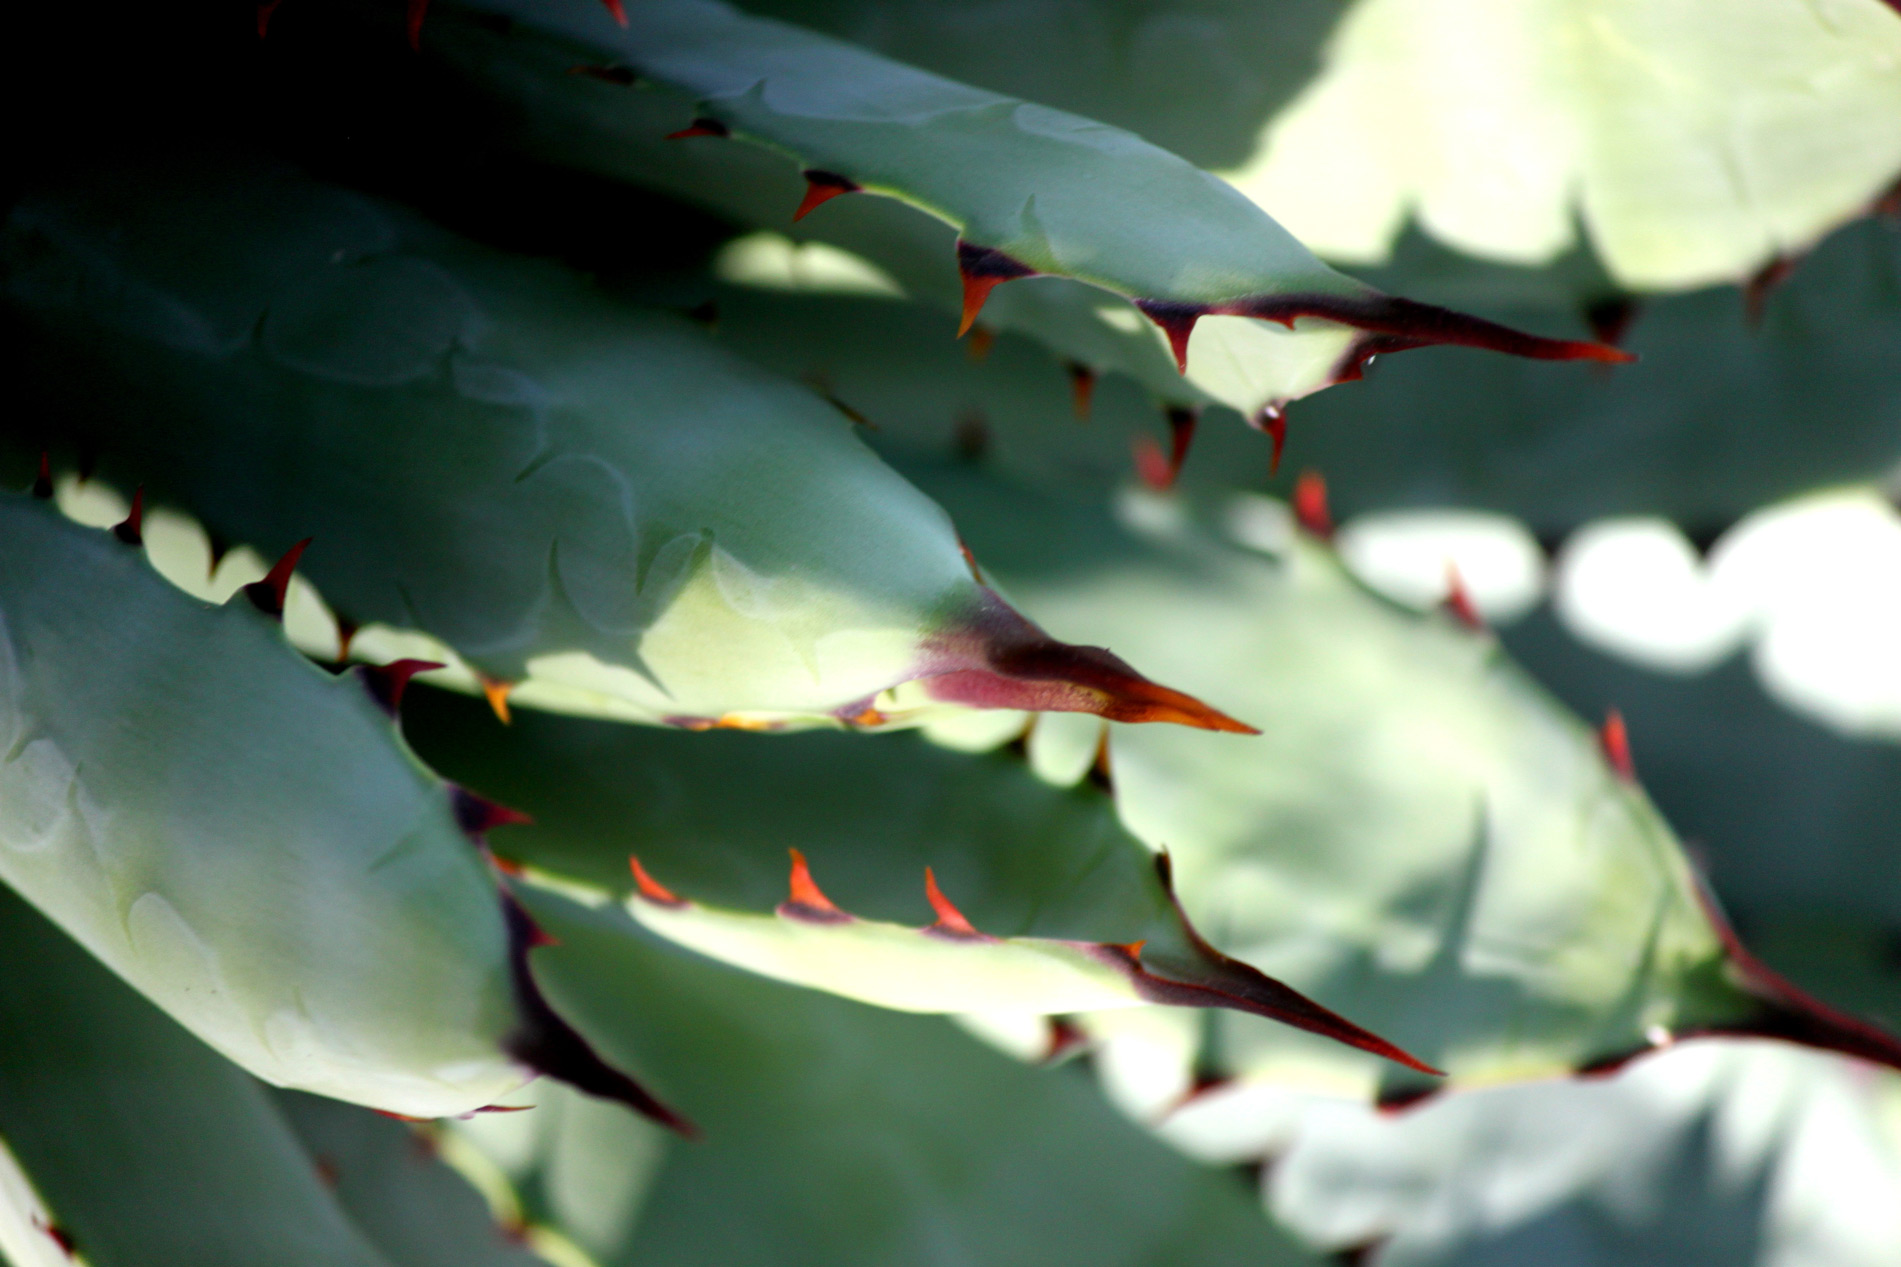 A close-up of the leaves and spines of the Black-spined Agave.